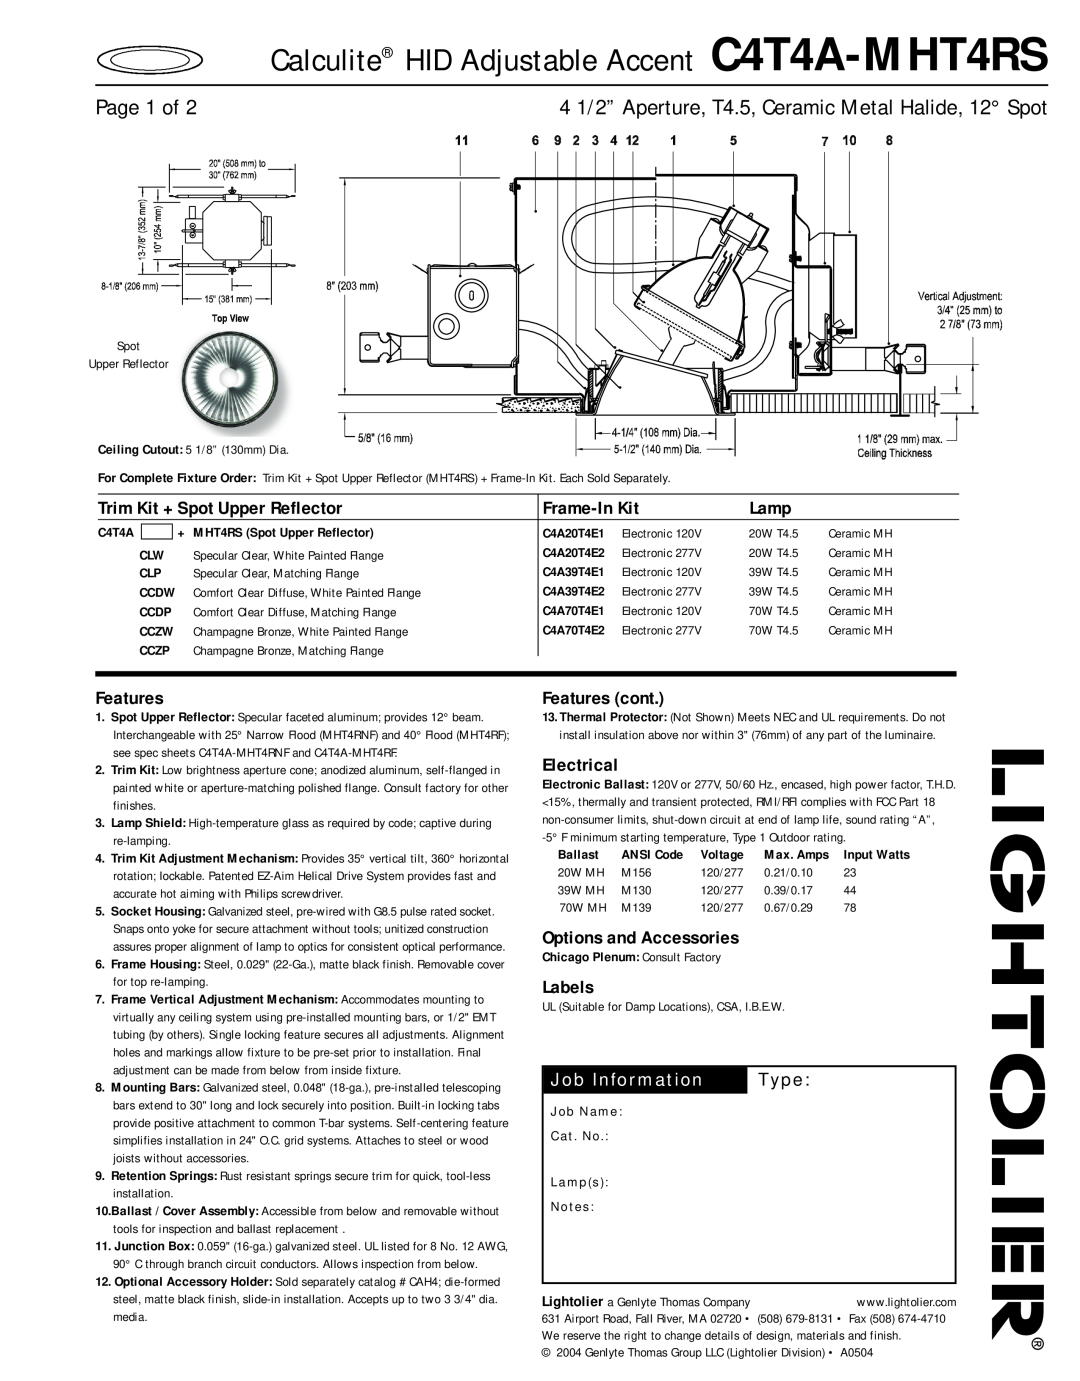 Lightolier manual Calculite HID Adjustable Accent C4T4A-MHT4RS, Job Information, Type, Page 1 of, Frame-InKit, Lamp 